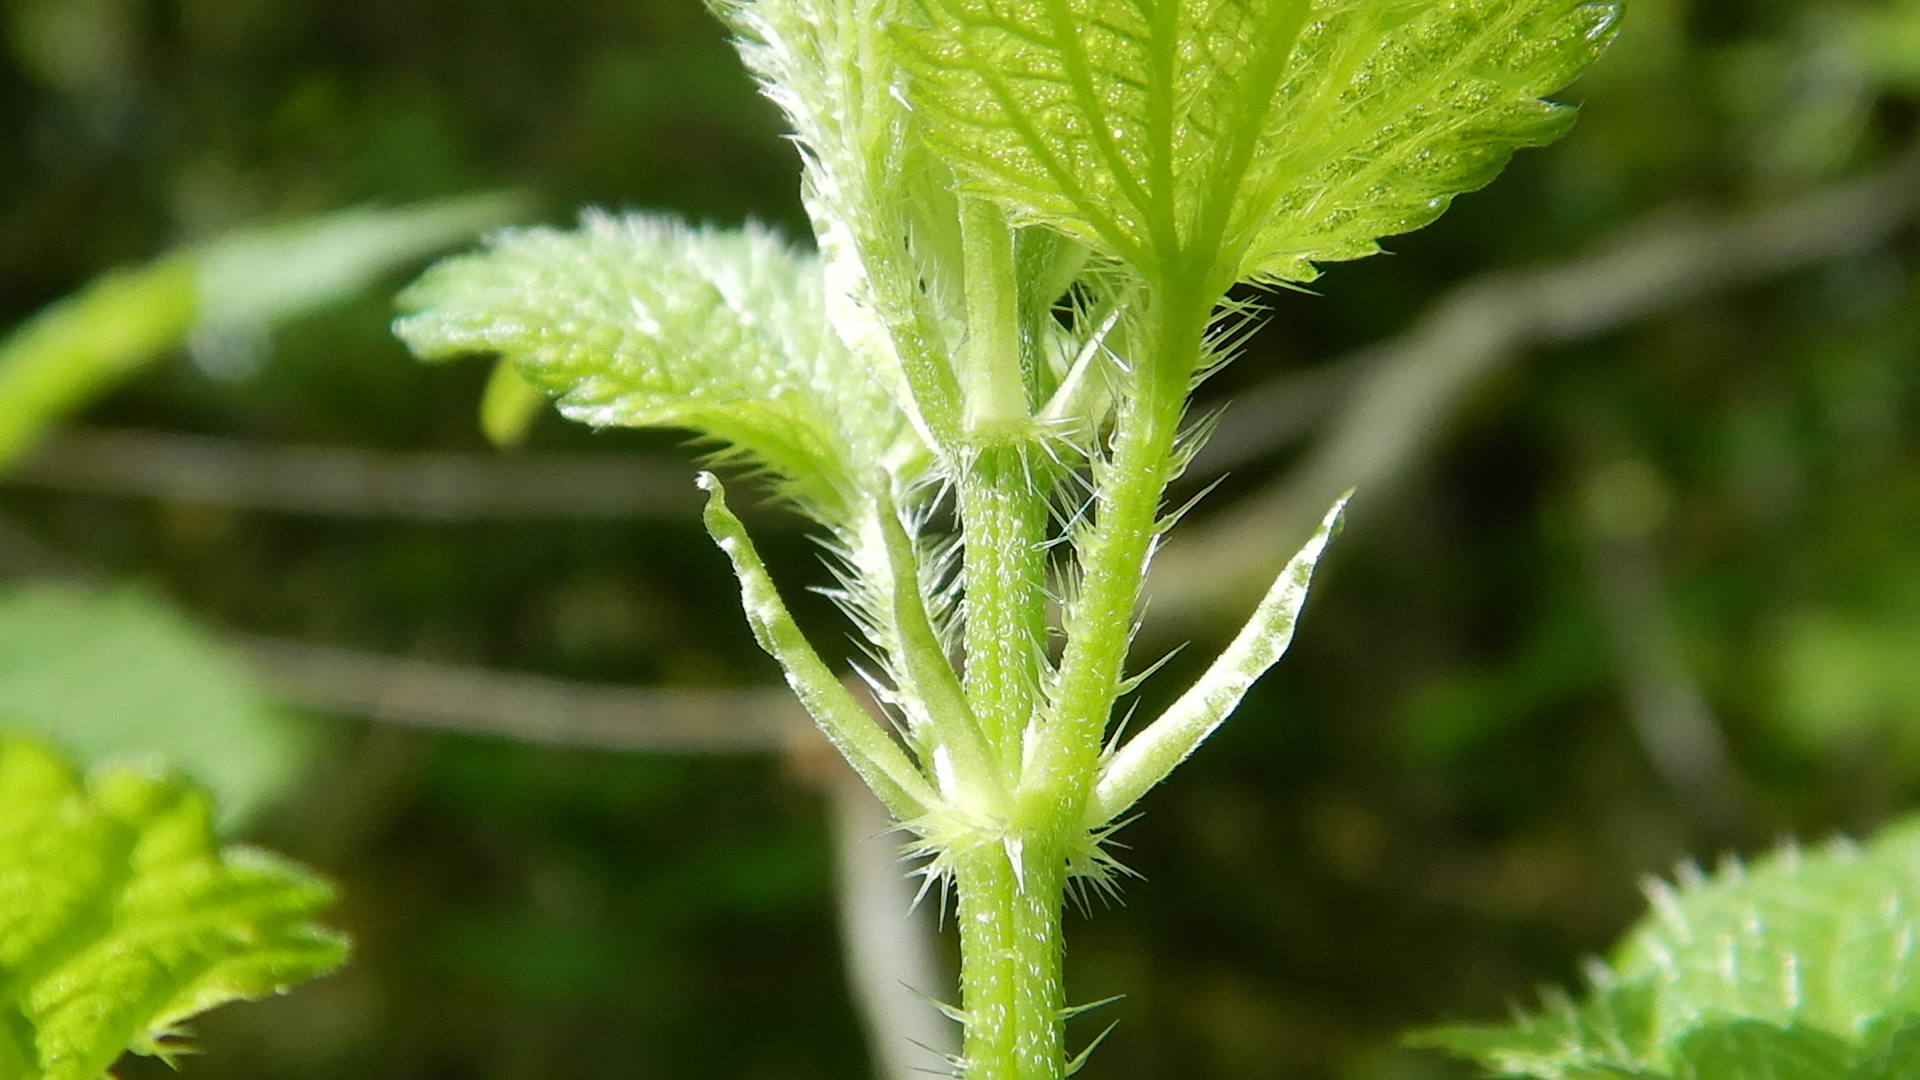 close-up view of young stinging nettle stem with many stinging hairs